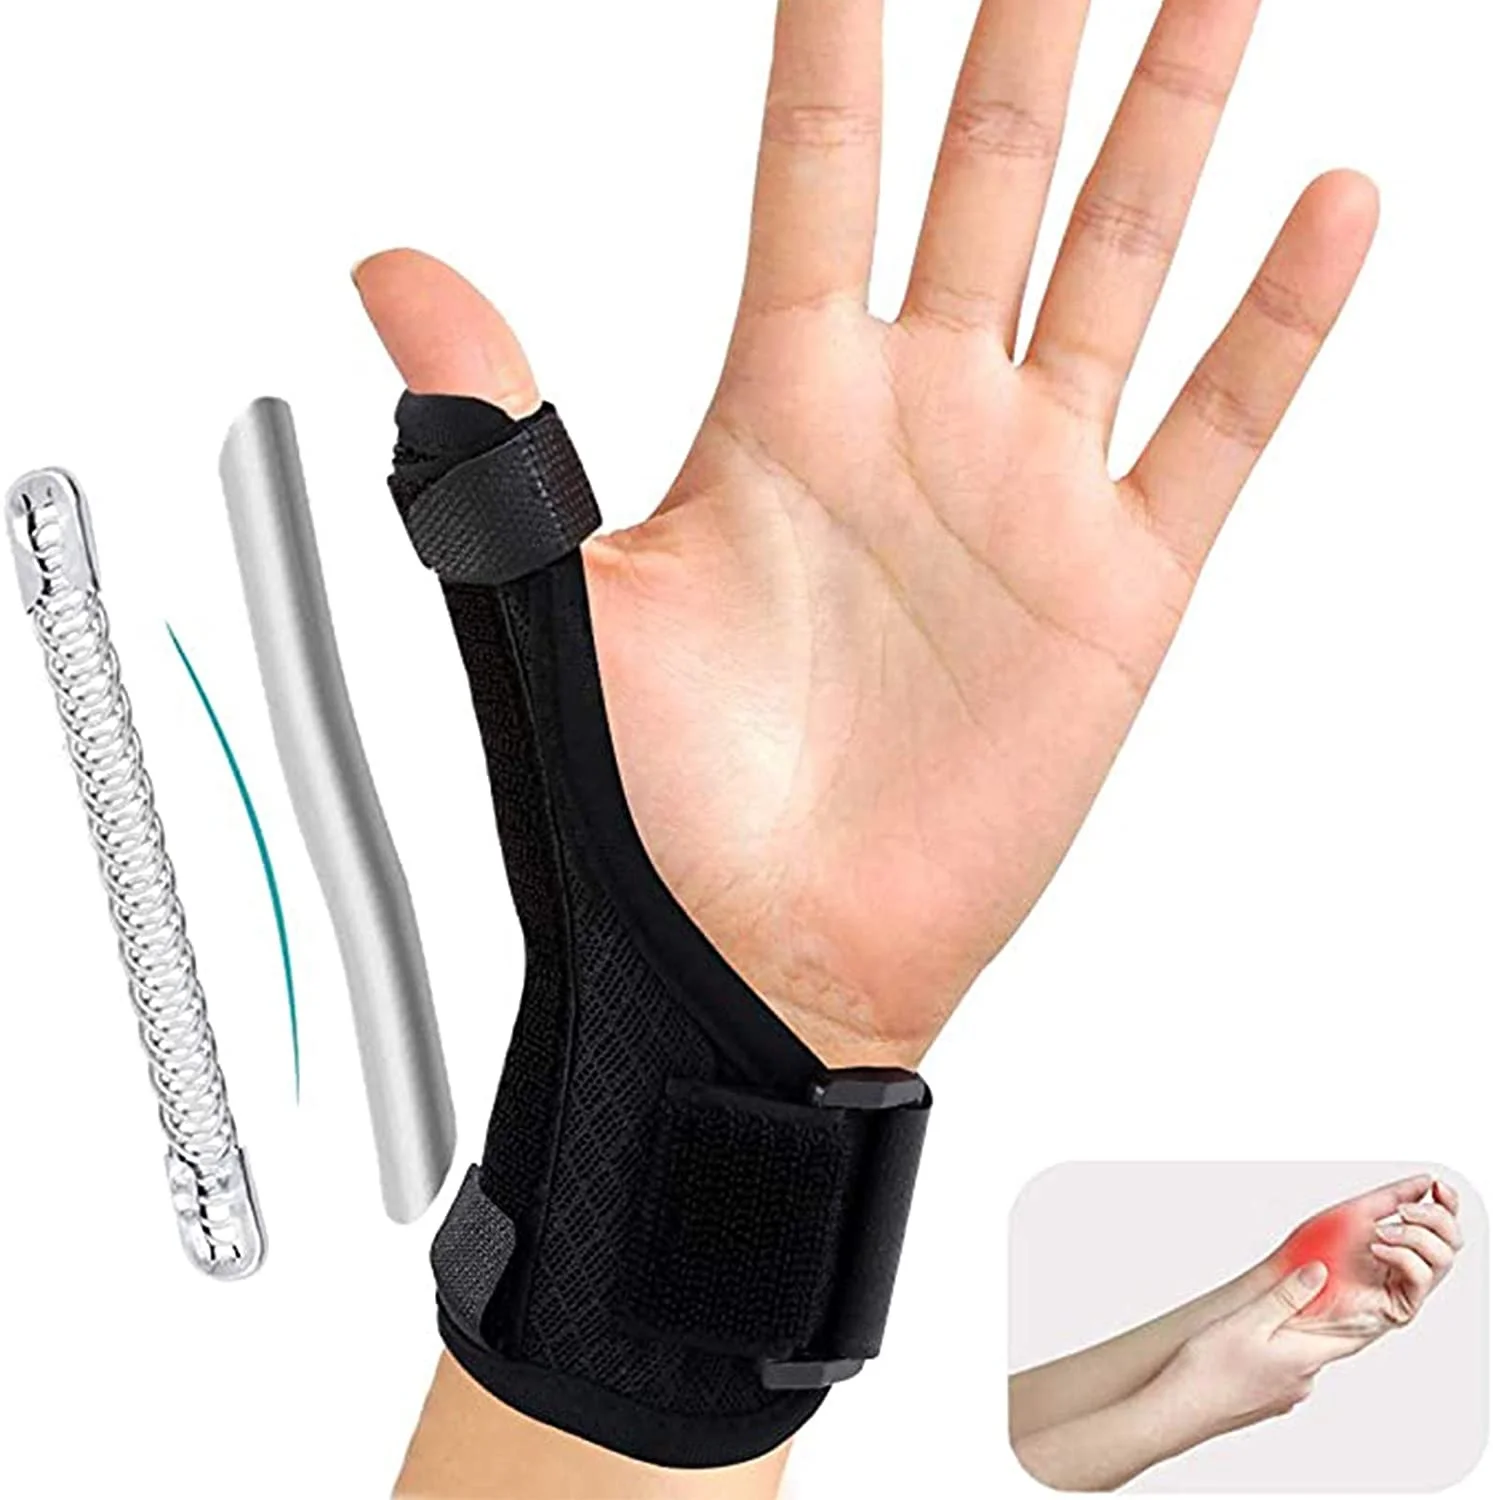 

Breathable Thumb Splint Wrap Guard Spica Wrist Support Brace Pain Relief Protective Hand Sock for Arthritis, Black, gray